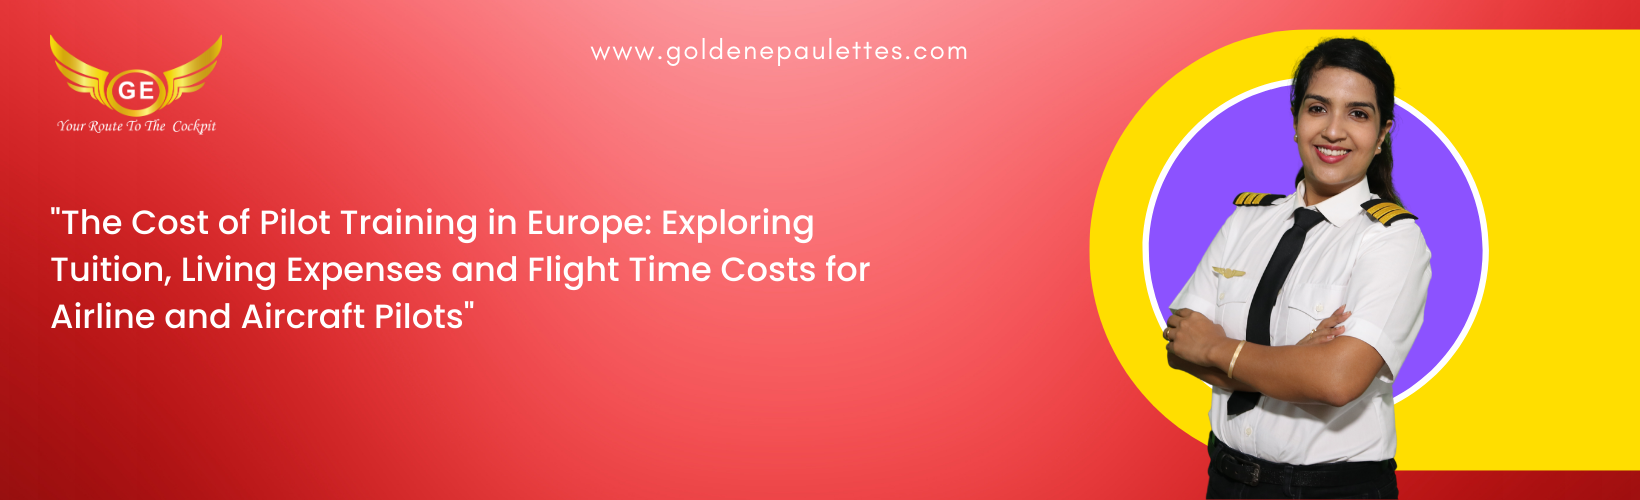 The Cost of Pilot Training in Europe – An overview of the cost of pilot training in Europe, taking into account the various expenses such as tuition, living expenses and flight time. (Reference